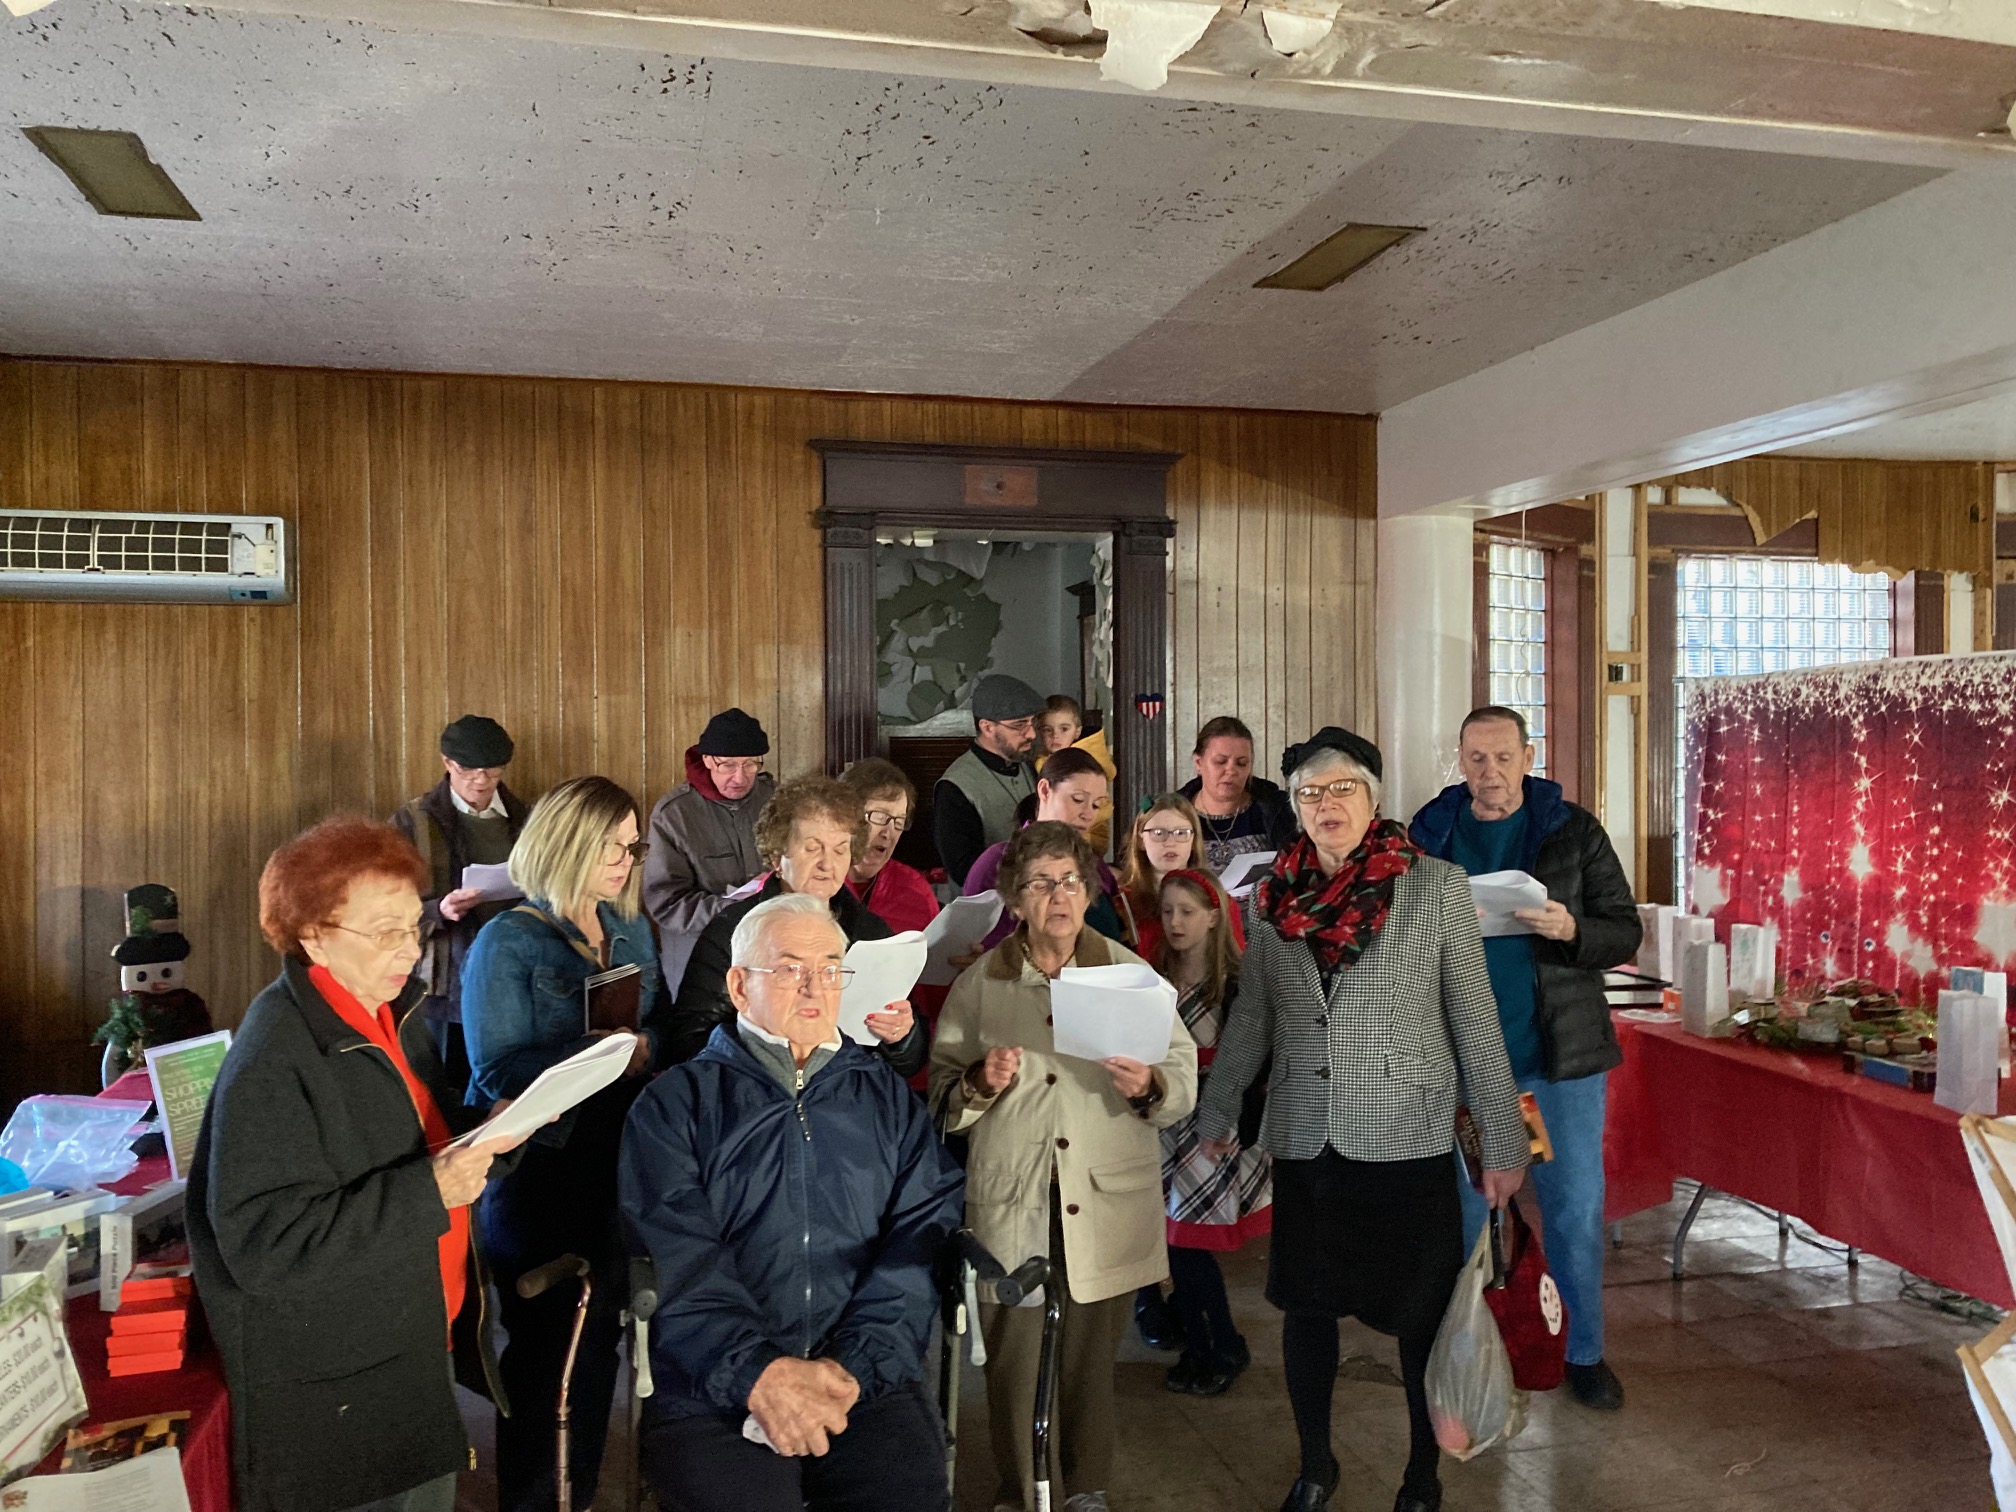 A group of our parishioners singing Christmas carols indoors. There are sixteen people, including three children. The wall behind them is paneled with medium-brown wood, and there's a table on the right side of the frame. The table is covered by a red tablecloth and has white paper bags on top of it. The bags are standing up and are apparently filled with something that is not visible. There are also what appear to be gifts on the table. There's a festive, red screen on the far side of the table that divides the room, apparently to make a cosier space for the event. The screen has big white stars on it that seem to be falling from the top of the screen into rows, leaving a trail of smaller stars in their wake.